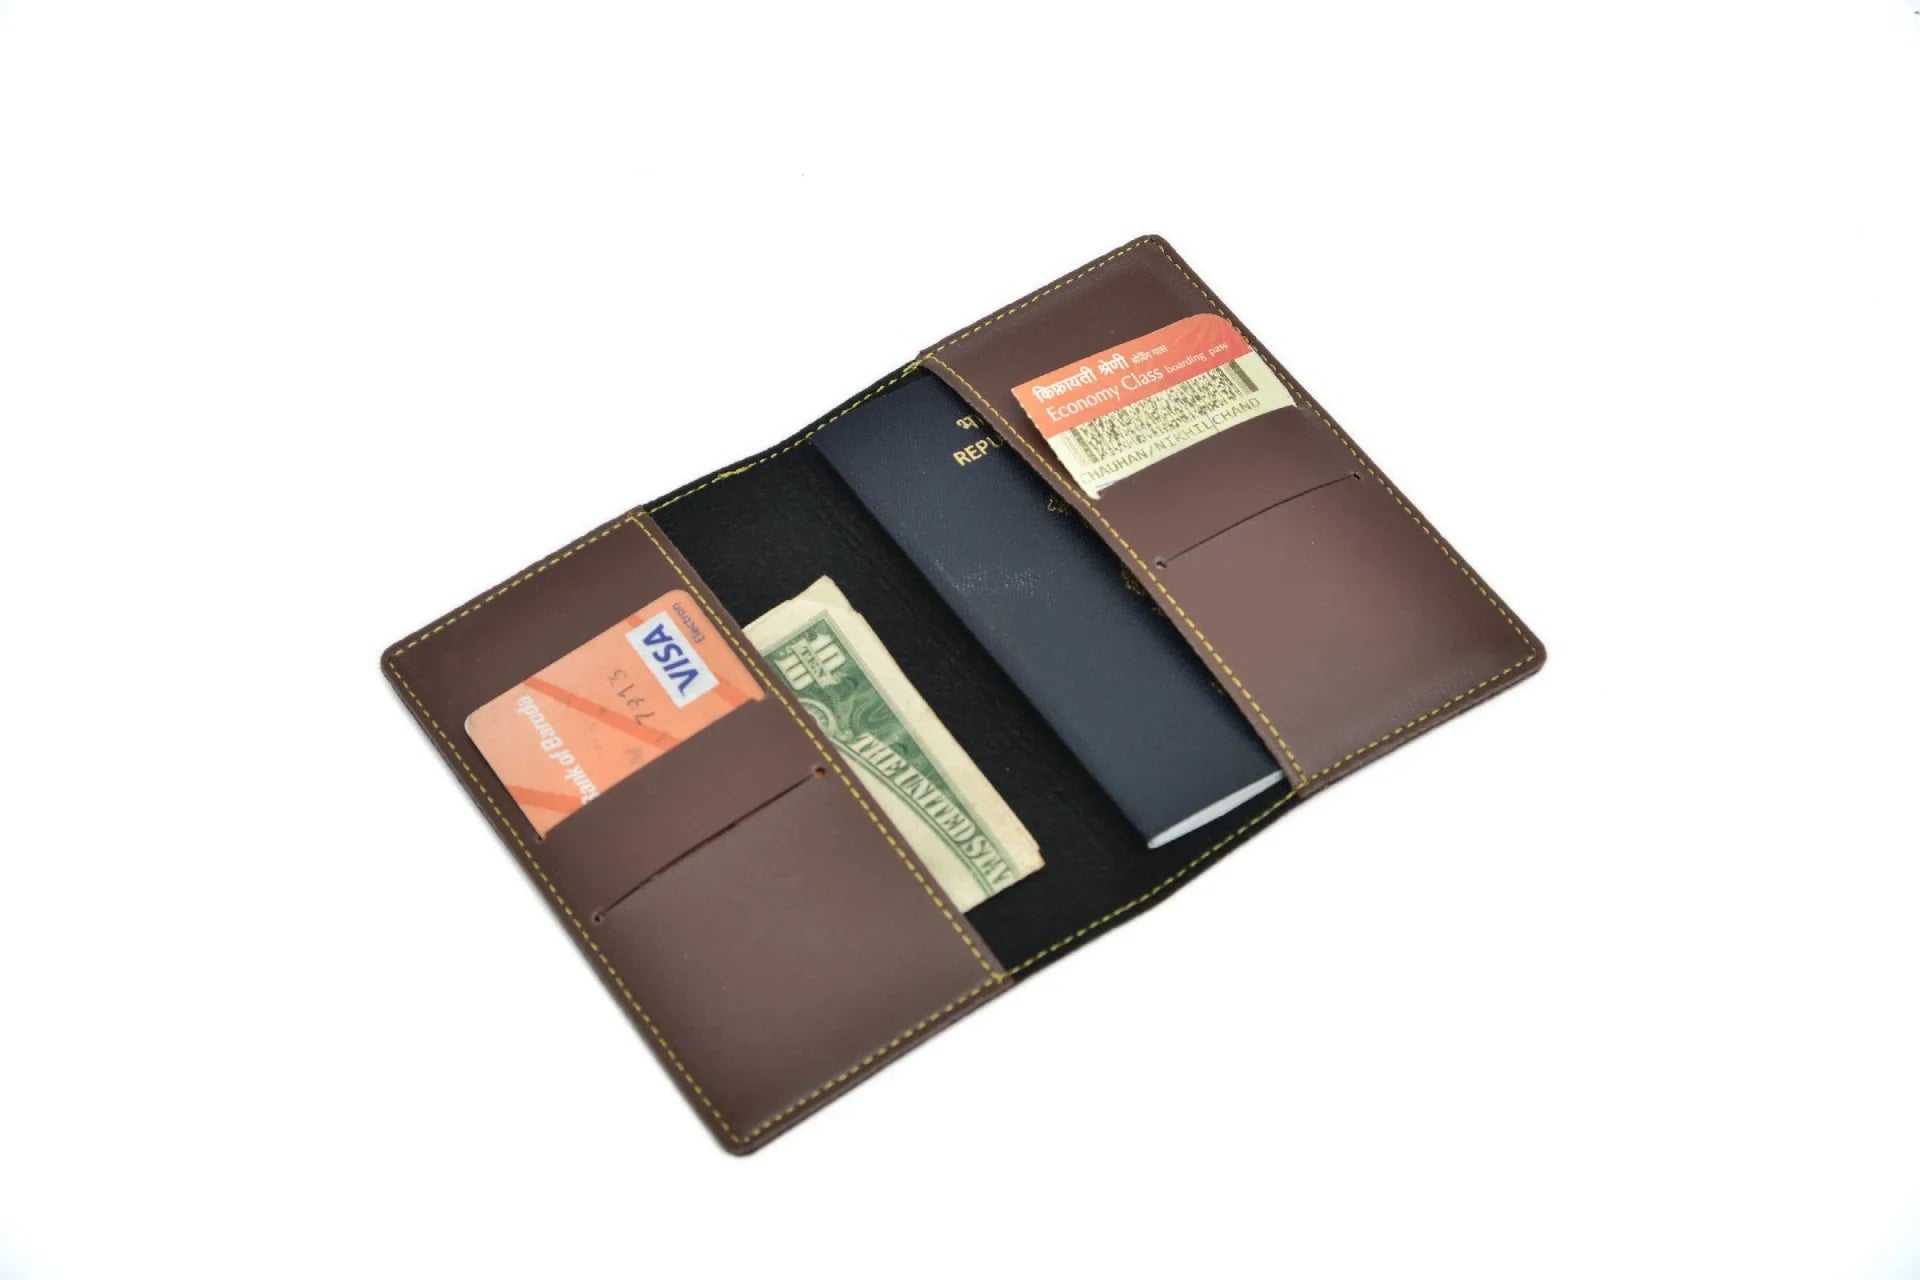 Inside or open view of brown passport holder